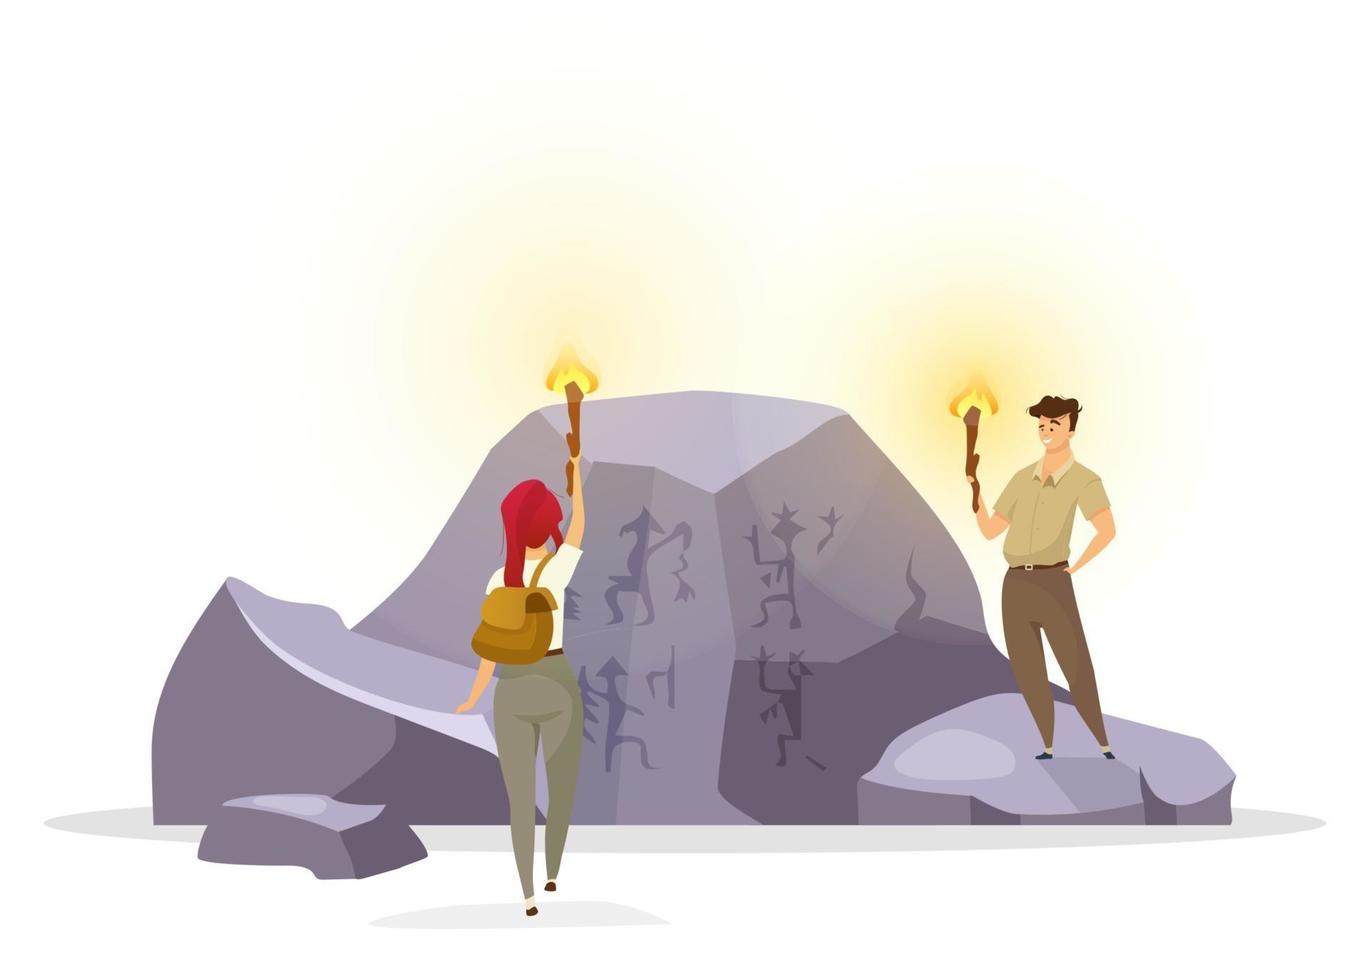 Tourists in cave flat vector illustration. Expedition group observing wall painting on rock. Prehistoric culture. Woman and man with torches discover mural pictures. Explorers cartoon characters